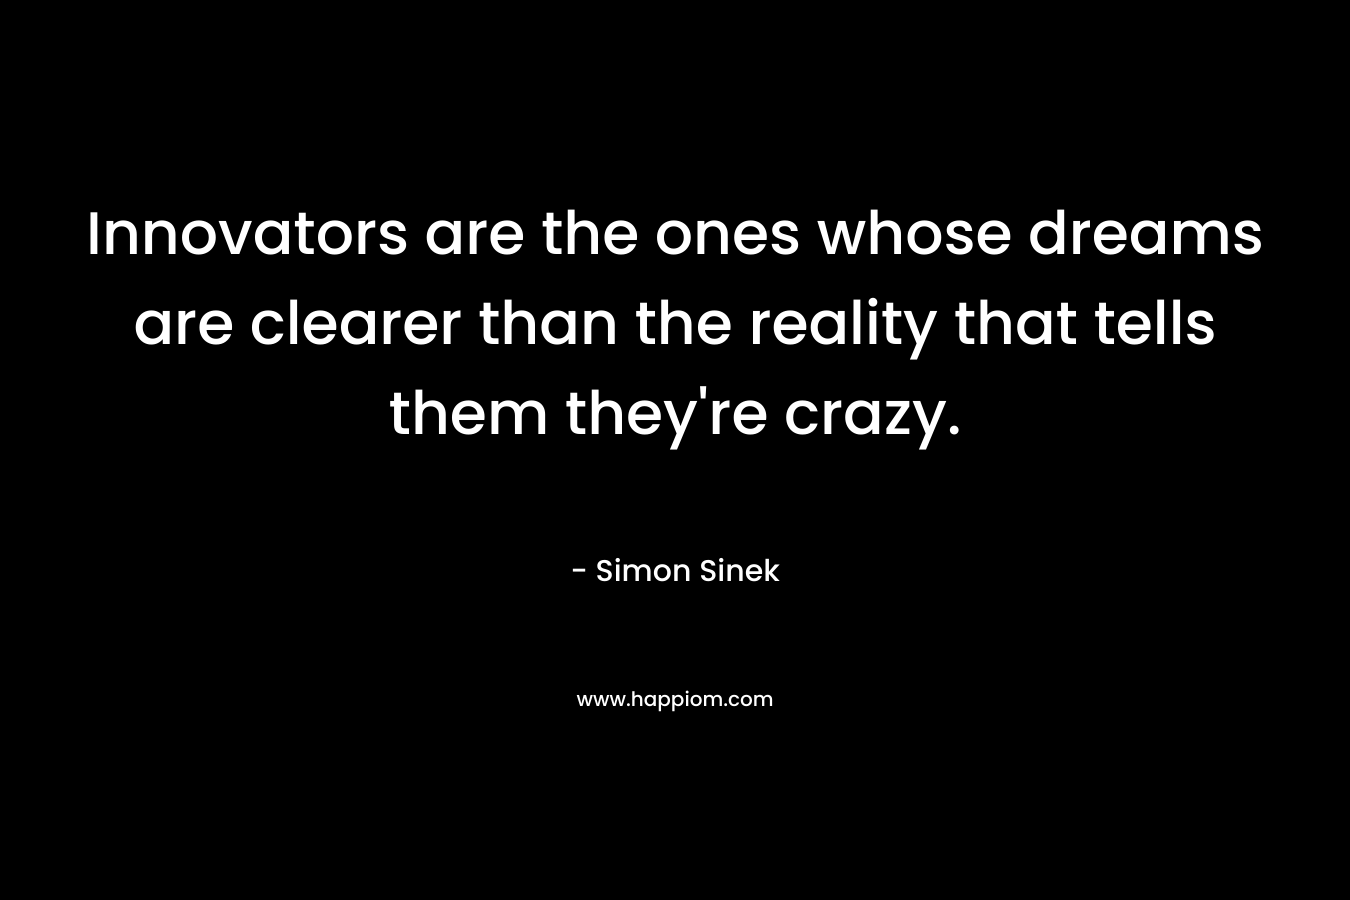 Innovators are the ones whose dreams are clearer than the reality that tells them they’re crazy. – Simon Sinek